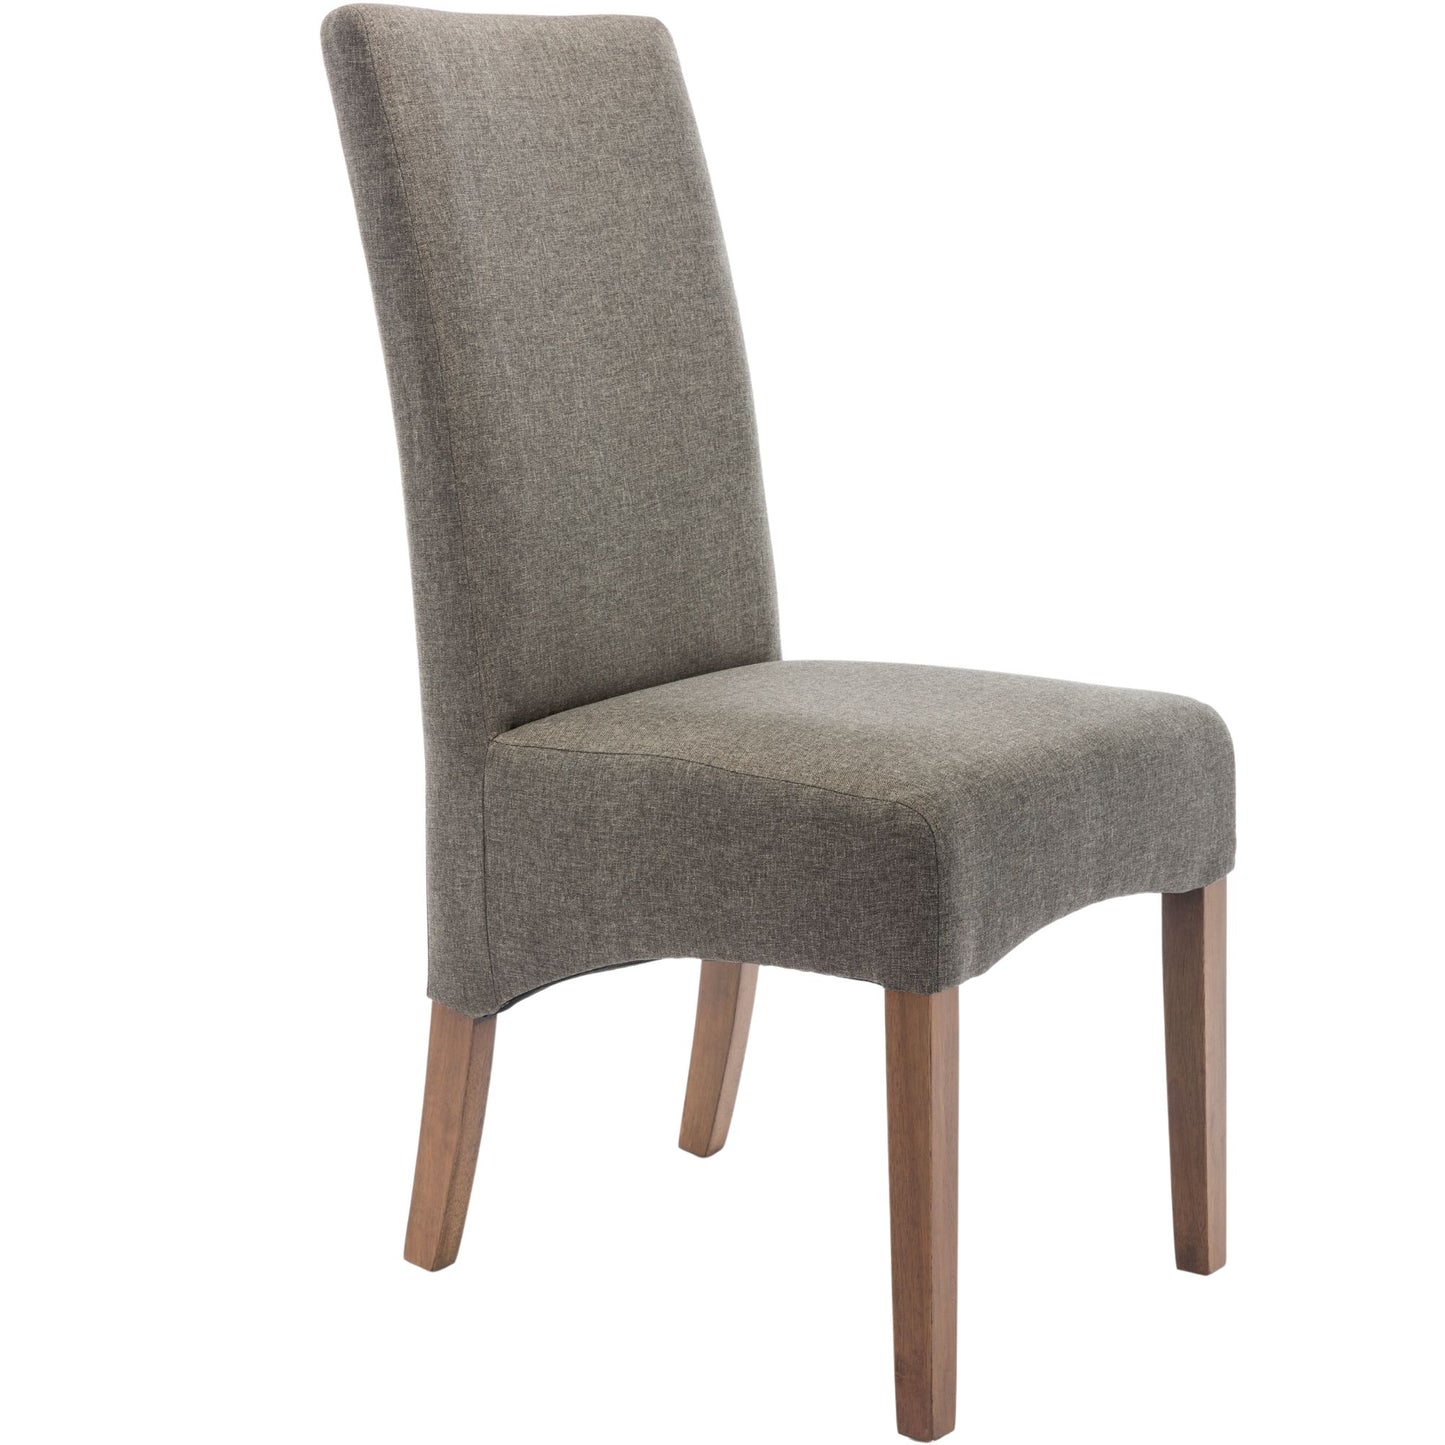 Aksa Fabric Upholstered Dining Chair Set of 8 Solid Pine Wood - Grey